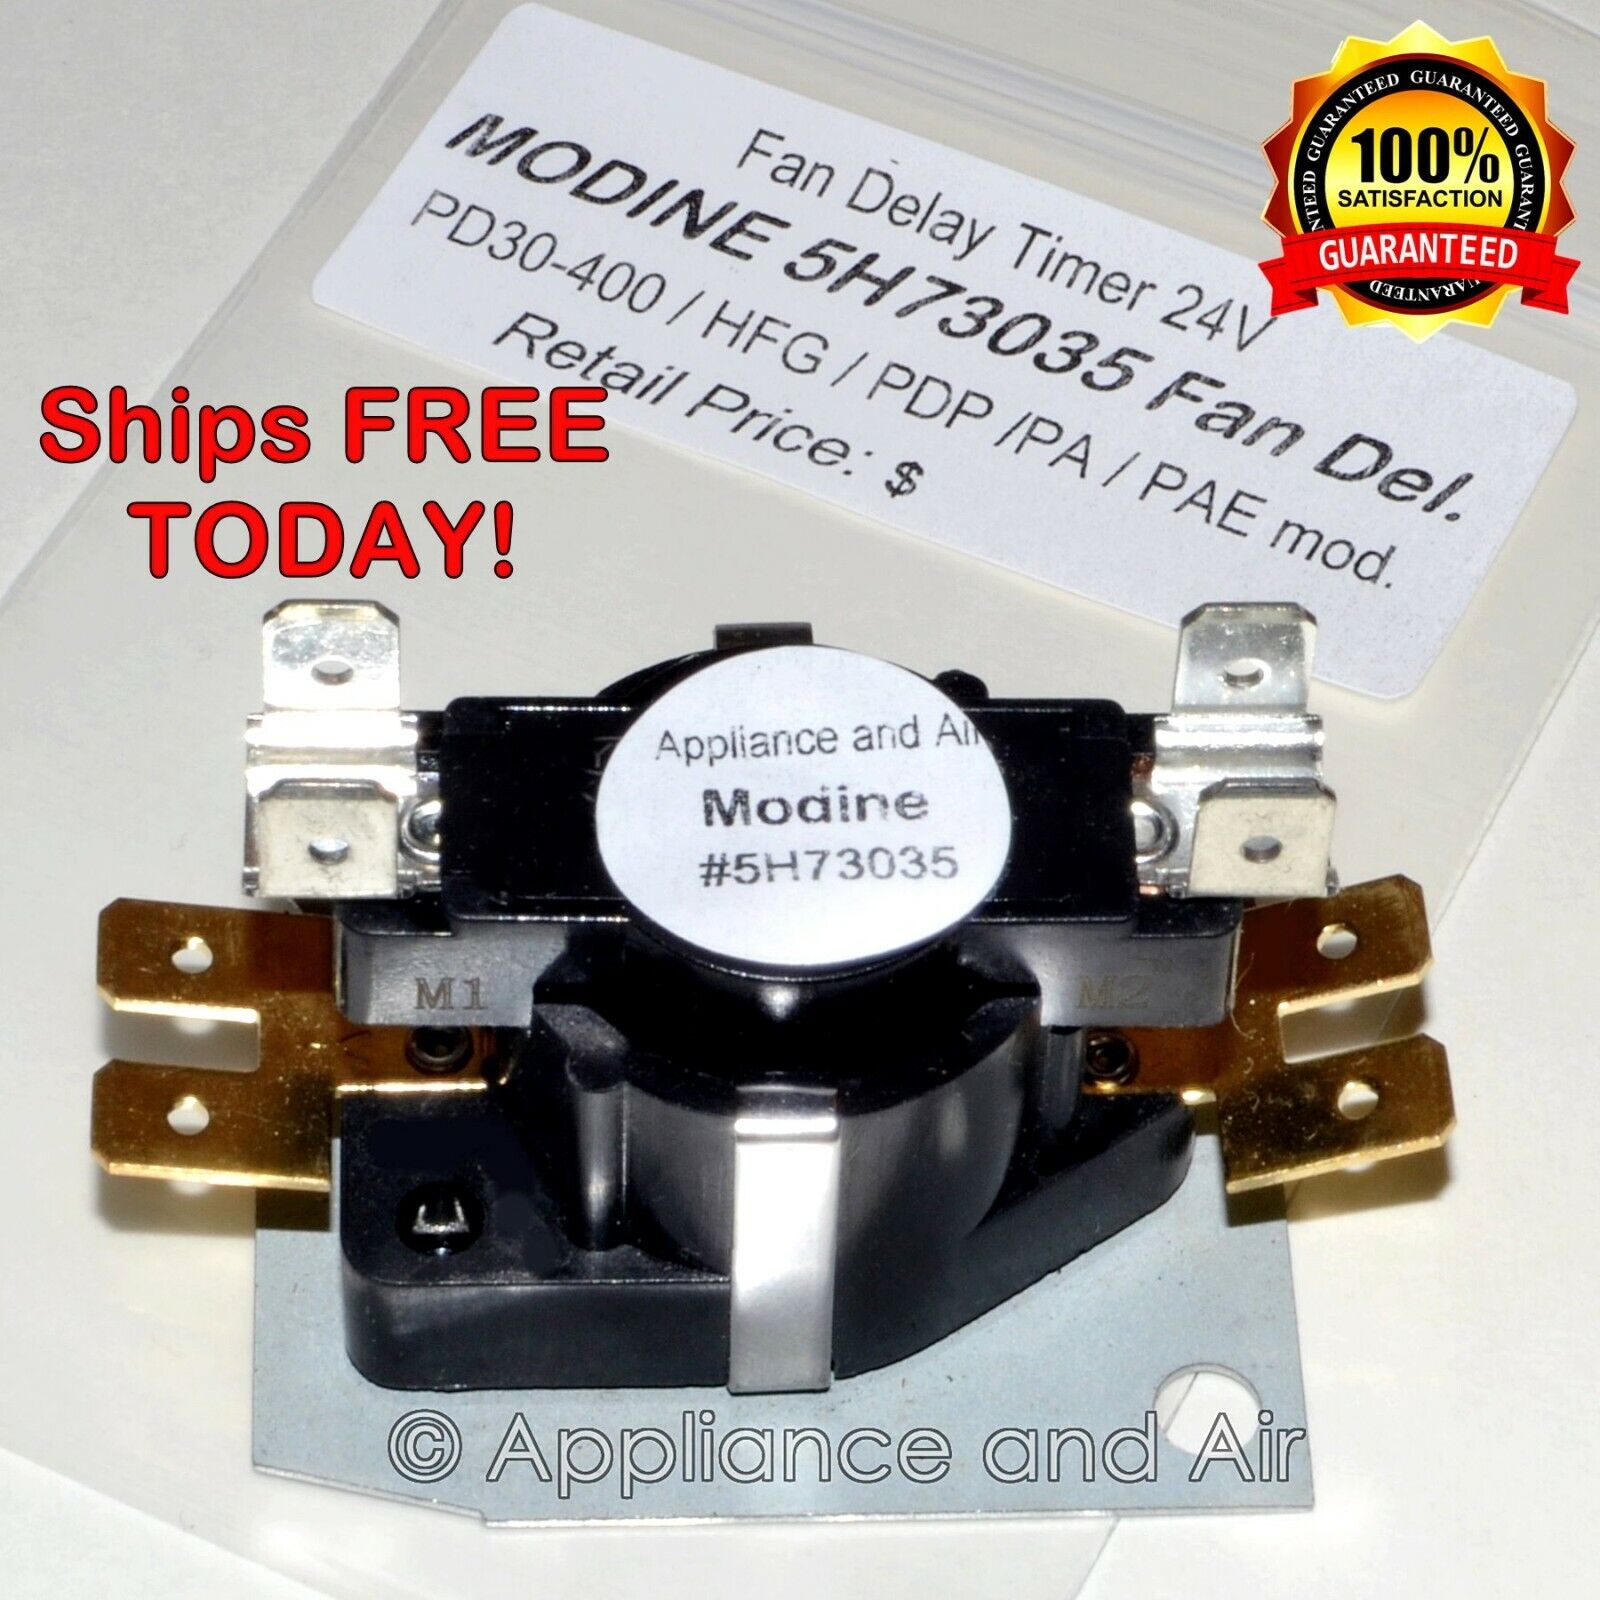 5H73035 Modine Gas Heater Fan Delay Timer Relay PD/PDP/PAE/PA - ships TODAY